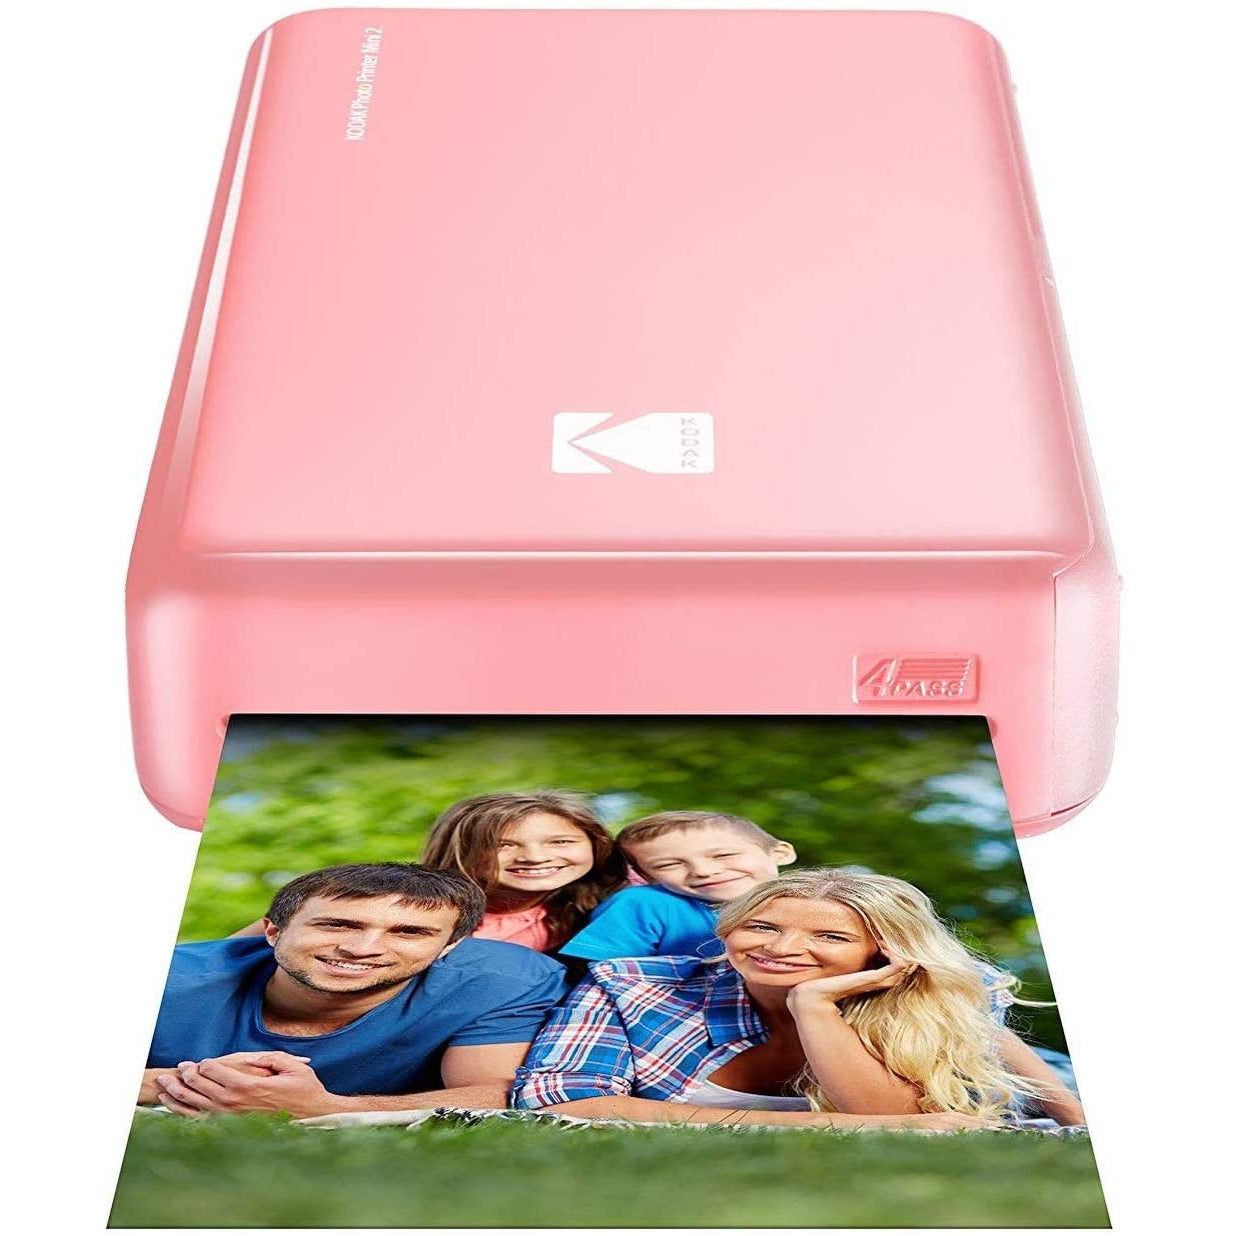 Kodak Mini 2 HD Wireless Mobile Instant Photo Printer with 4Pass Patented Printing Technology, Compatible with iOS and Android Devices - Pink